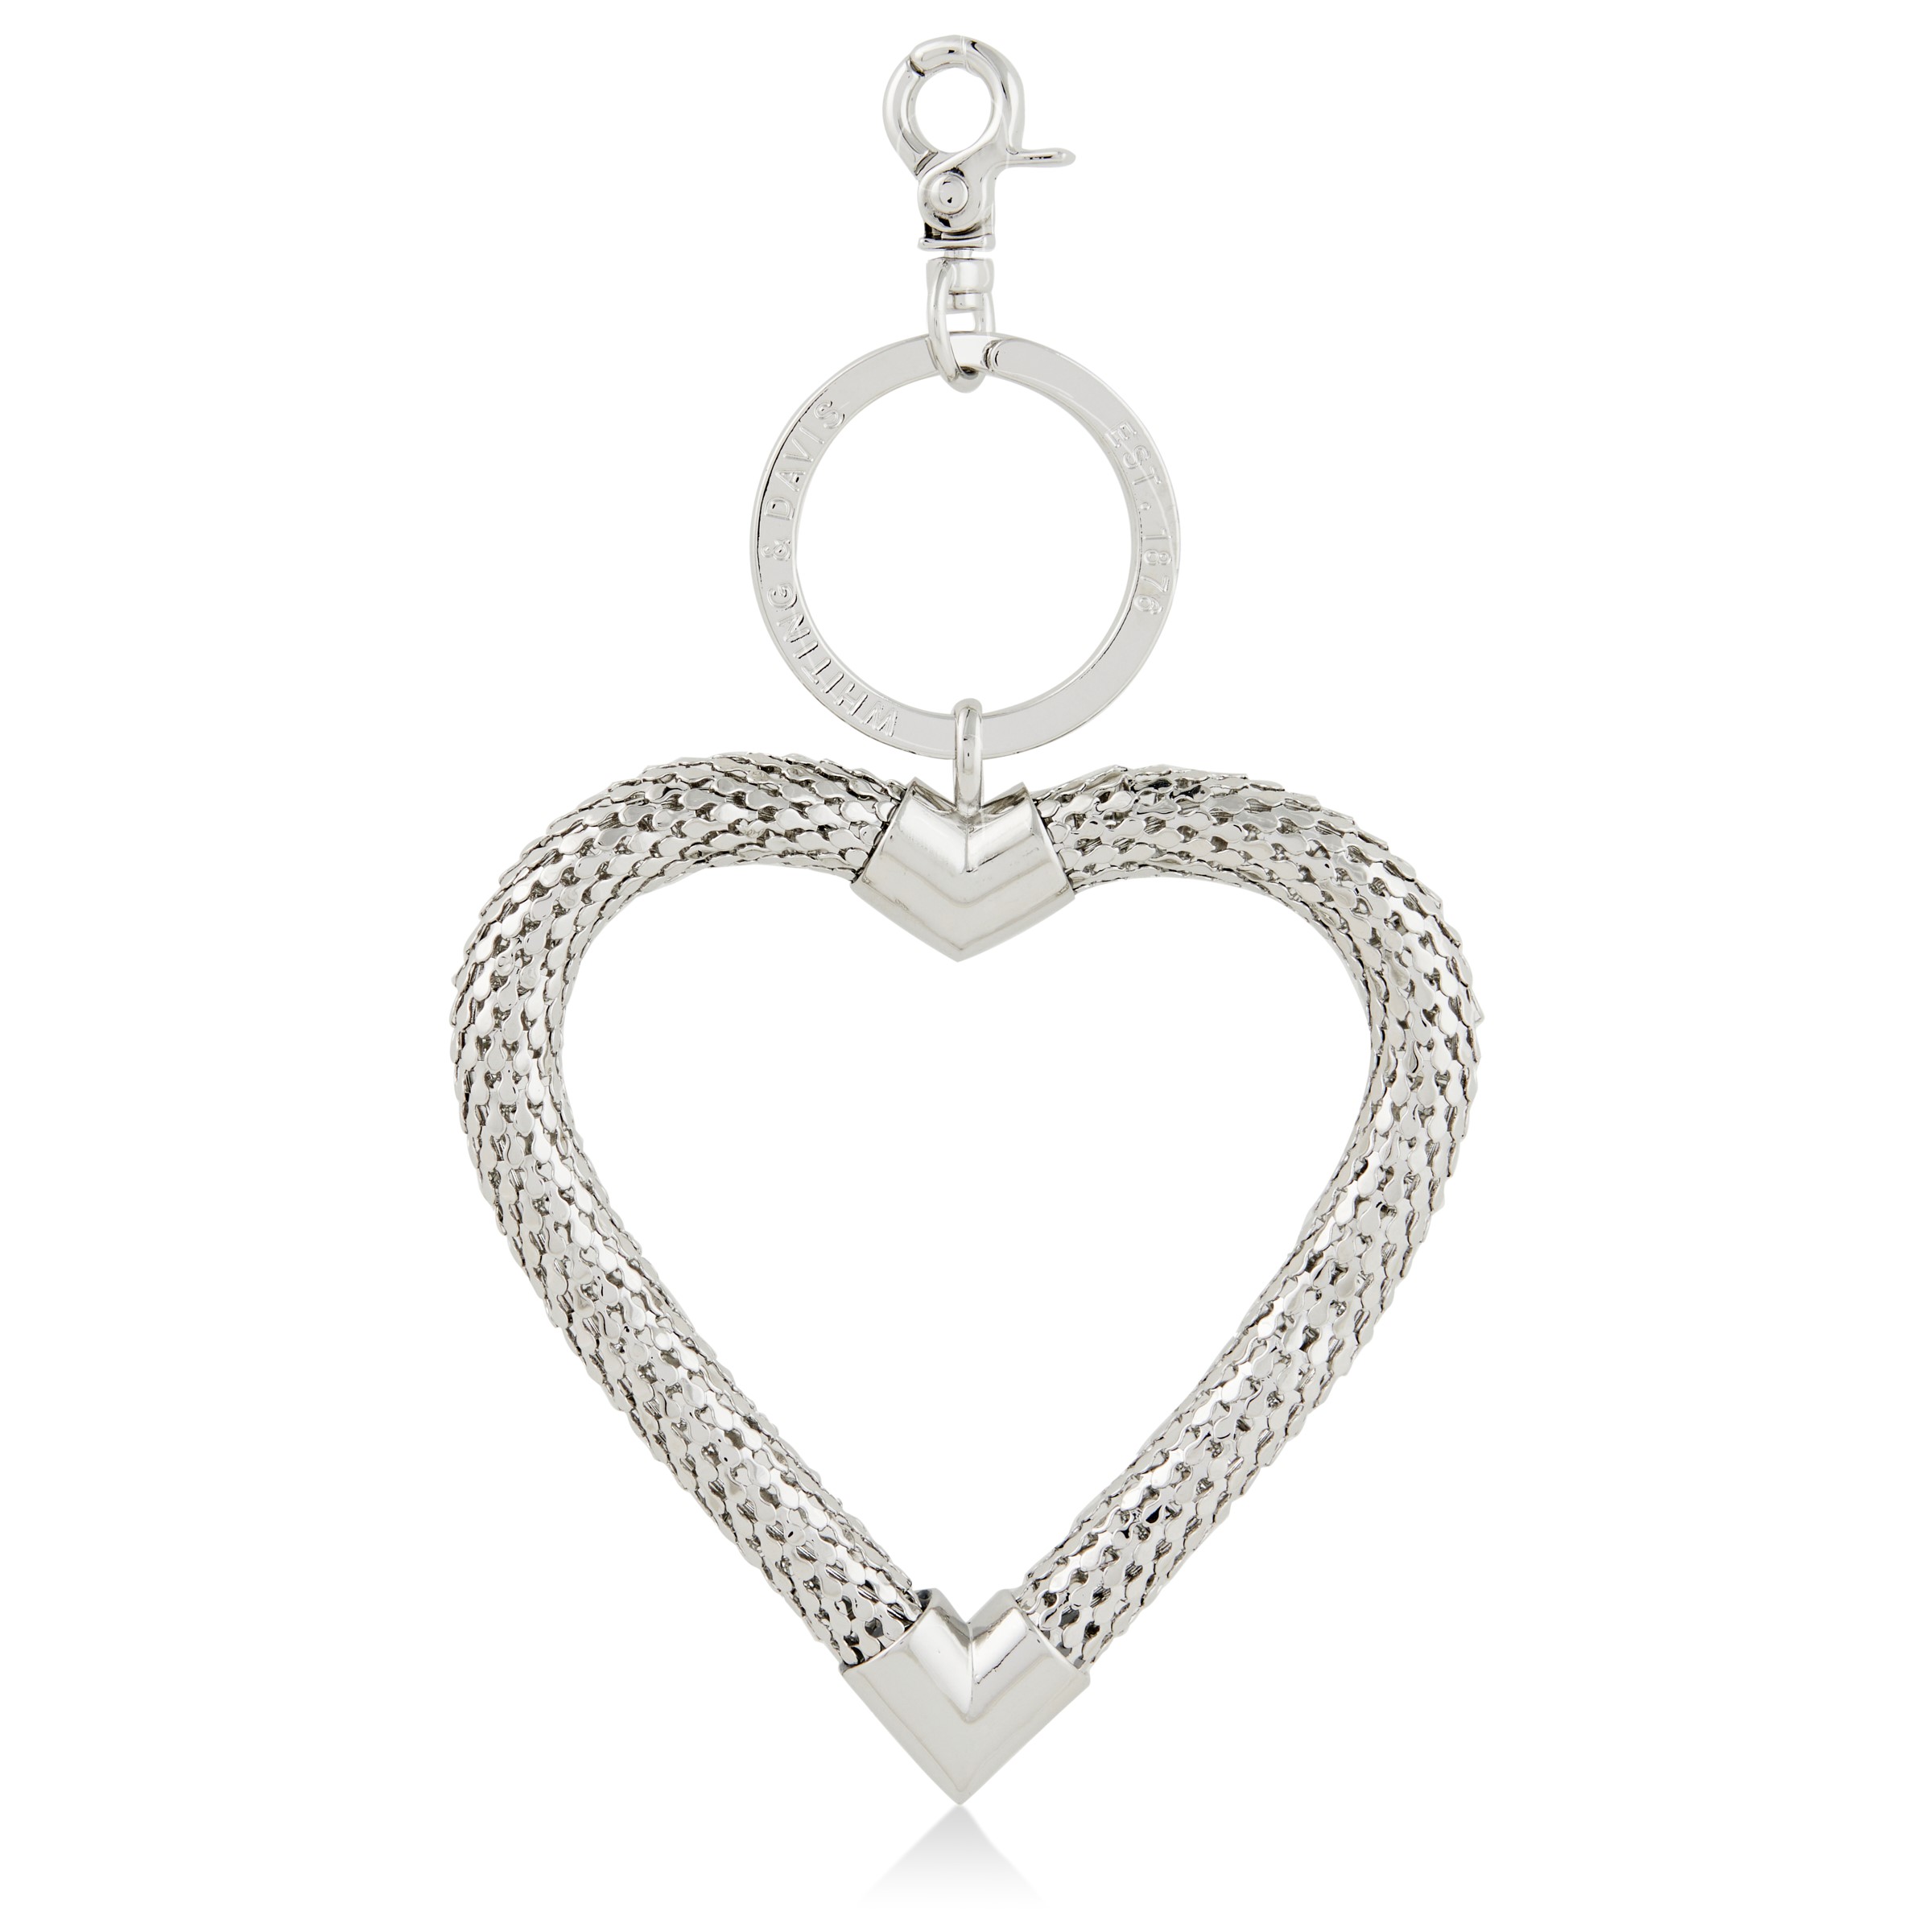 Heart Keychain Clip - Whiting and Davis Collection